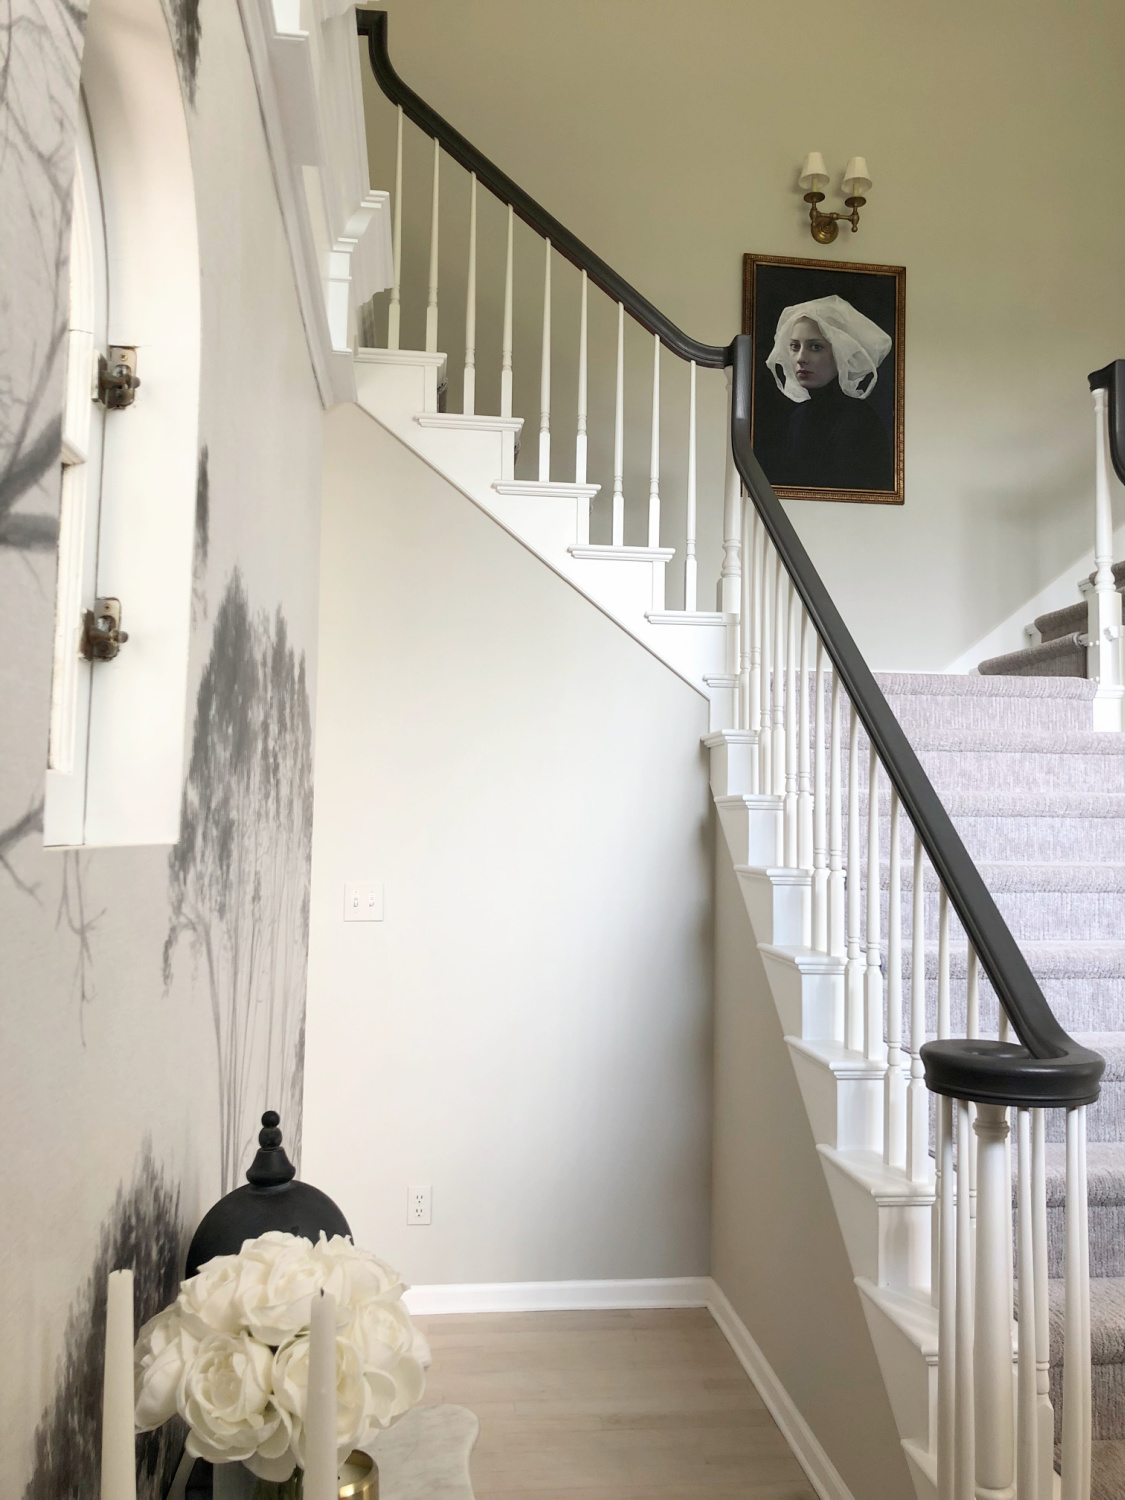 Sherwin-Williams Repose Gray in our two story entry with curving staircase and tree wallpaper - Hello Lovely Studio. #modernfrench #reposegray